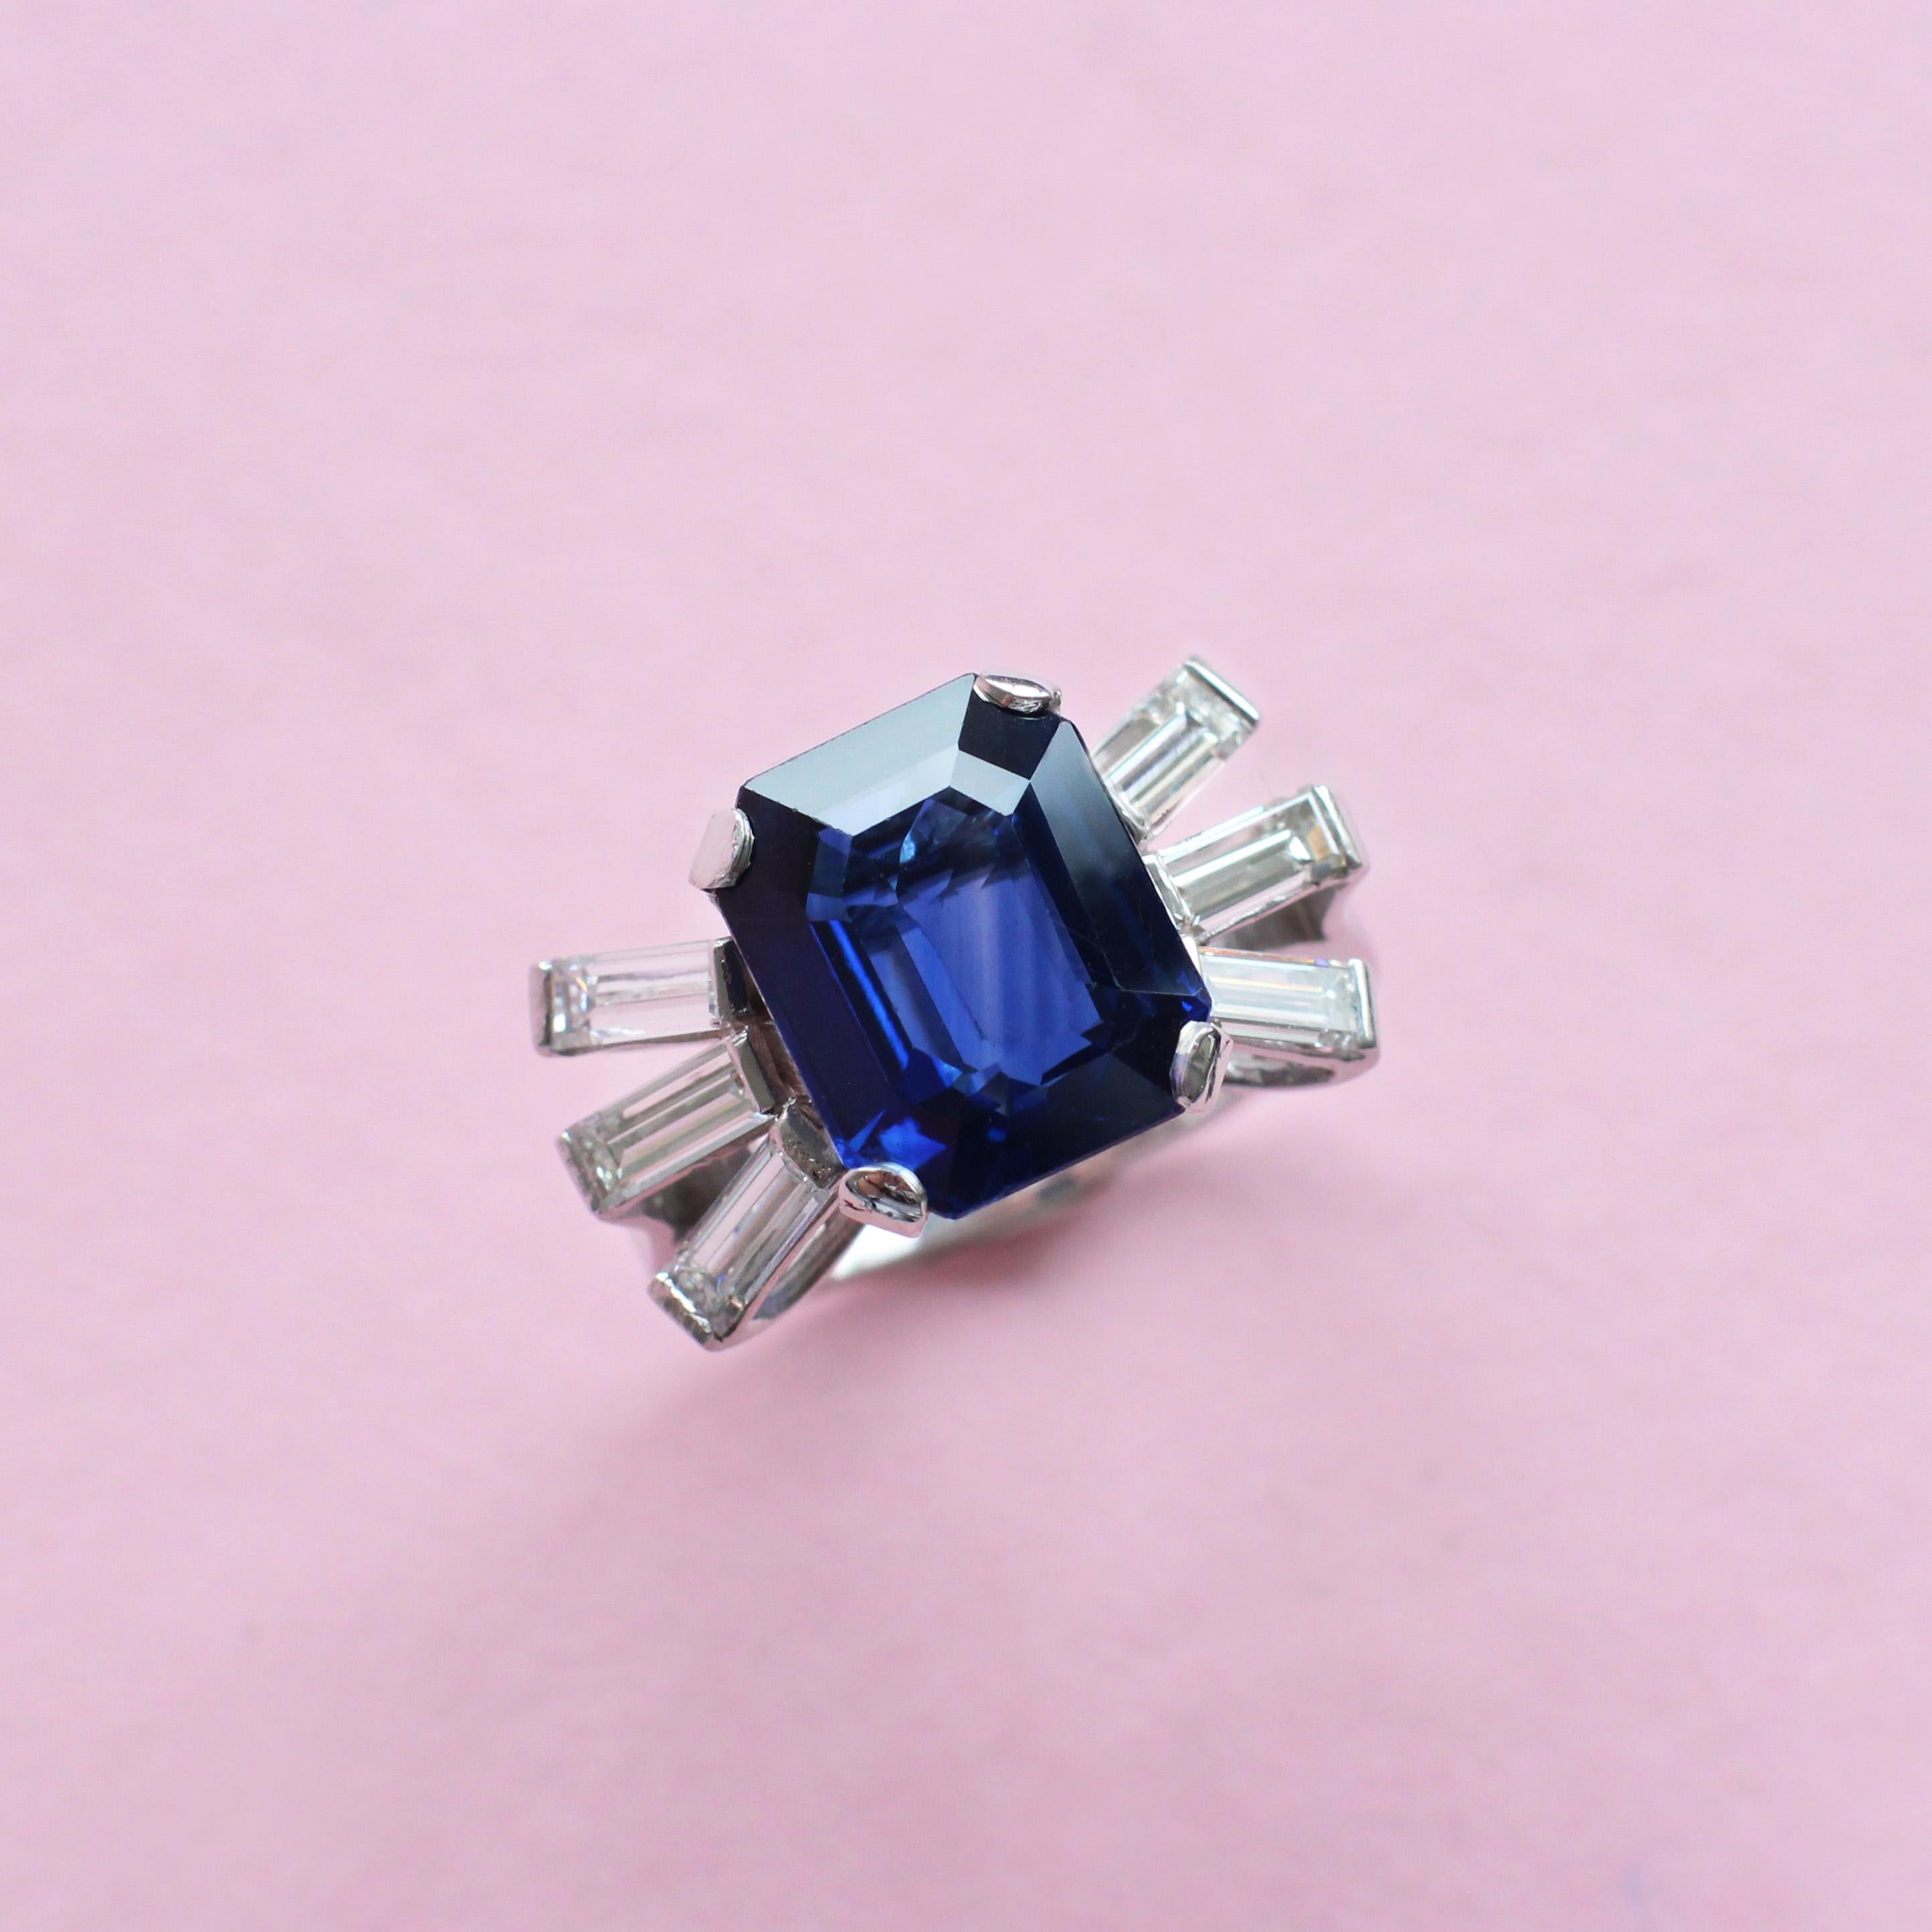 Feel bold and fearless with this powerful statement ring, hand-crafted in the Haruni workshop. Its centre stone is a beguiling five-carat, deep blue sapphire, featured in an octagon cut and positioned between six white baguette diamonds for a truly